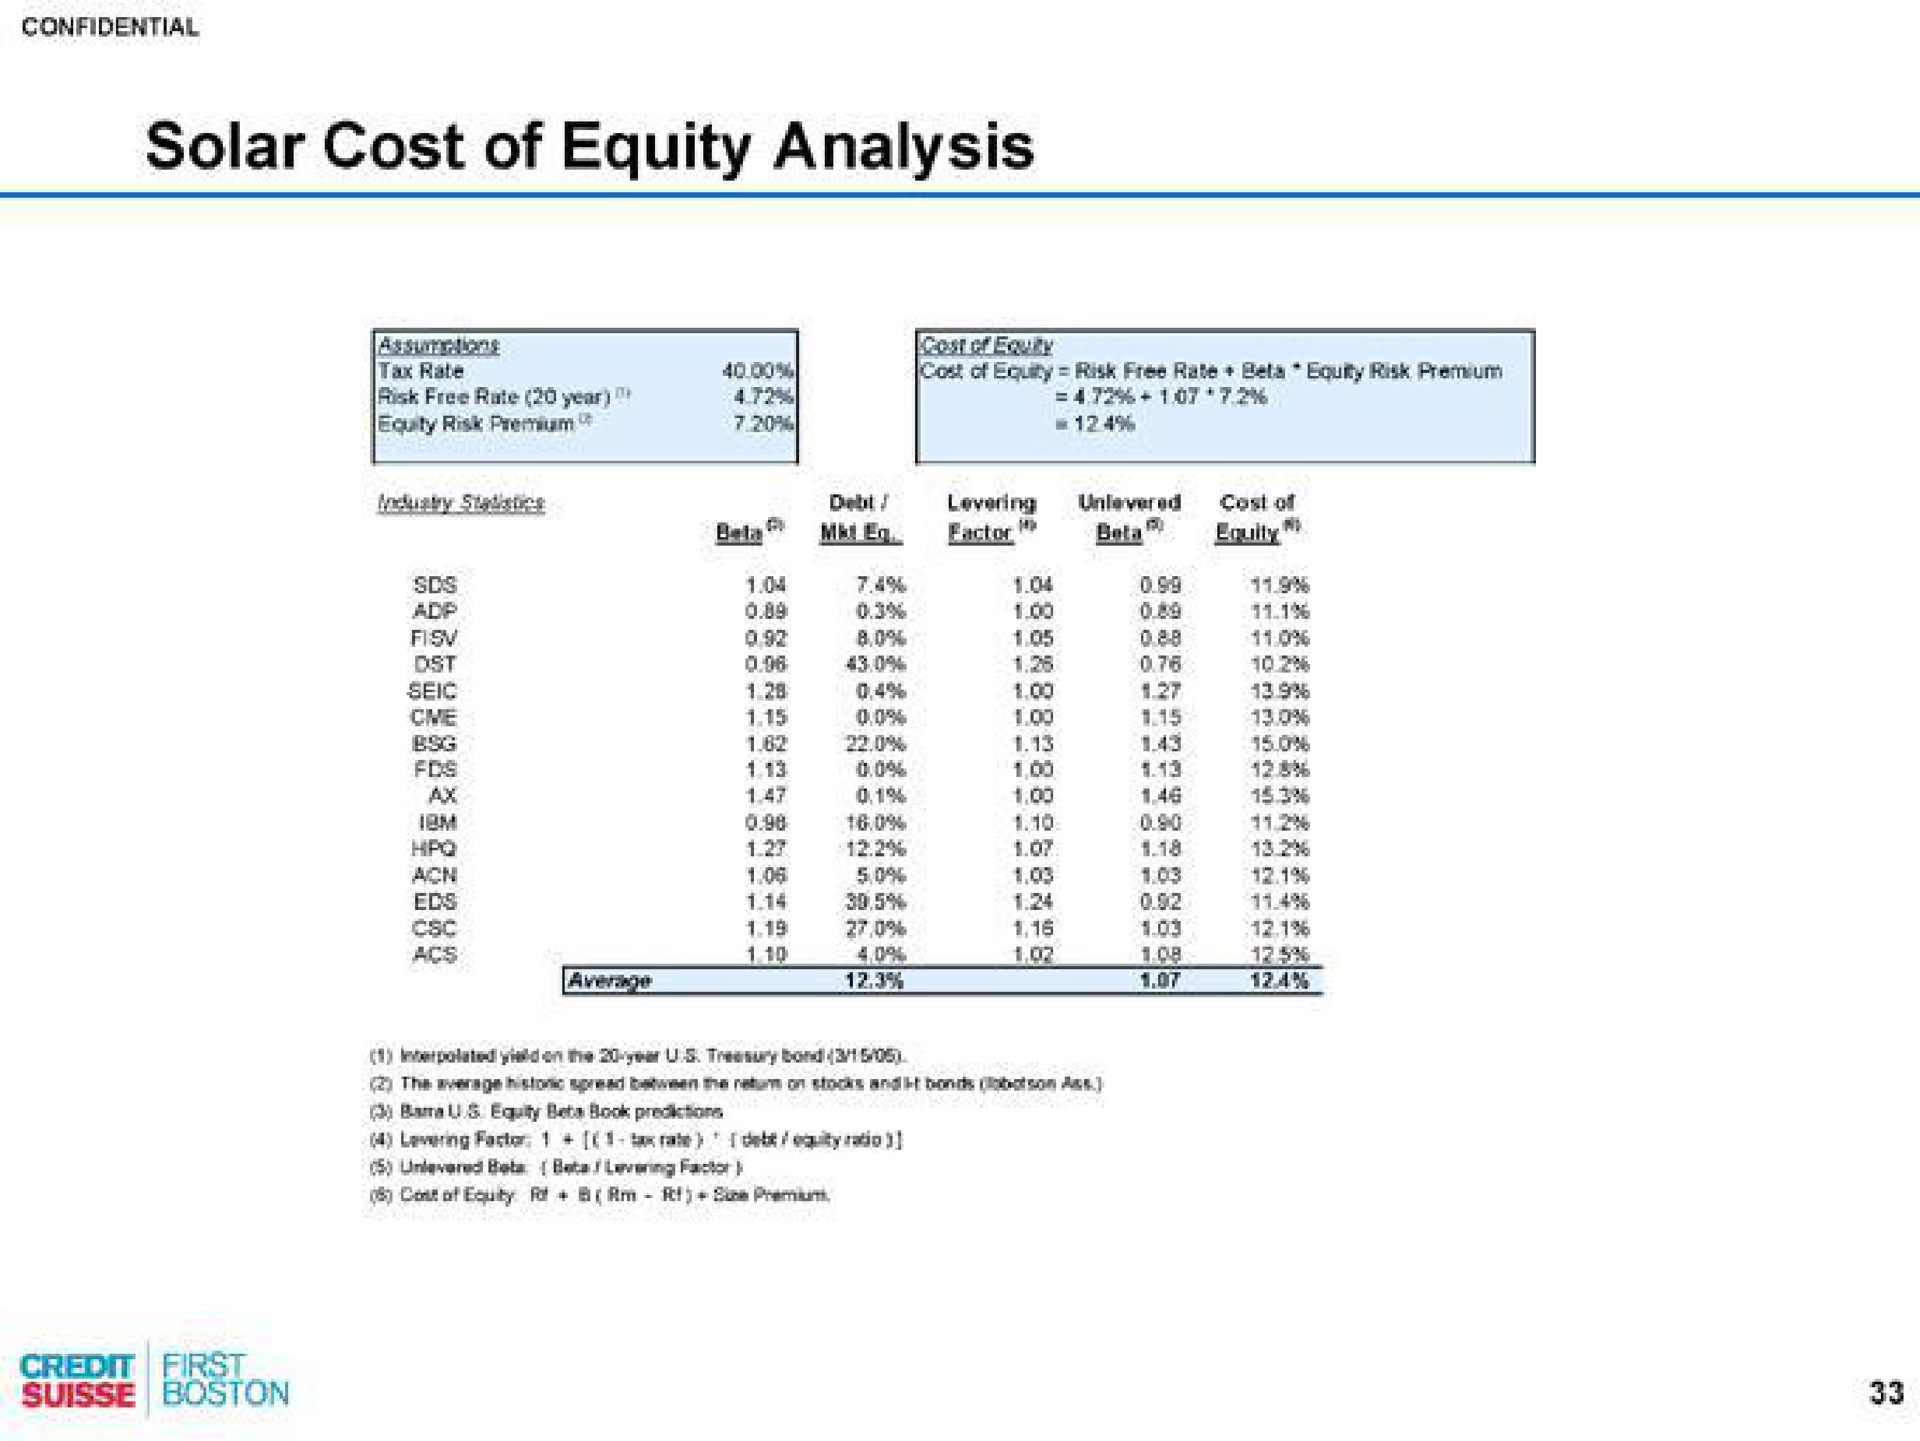 solar cost of equity analysis | Credit Suisse